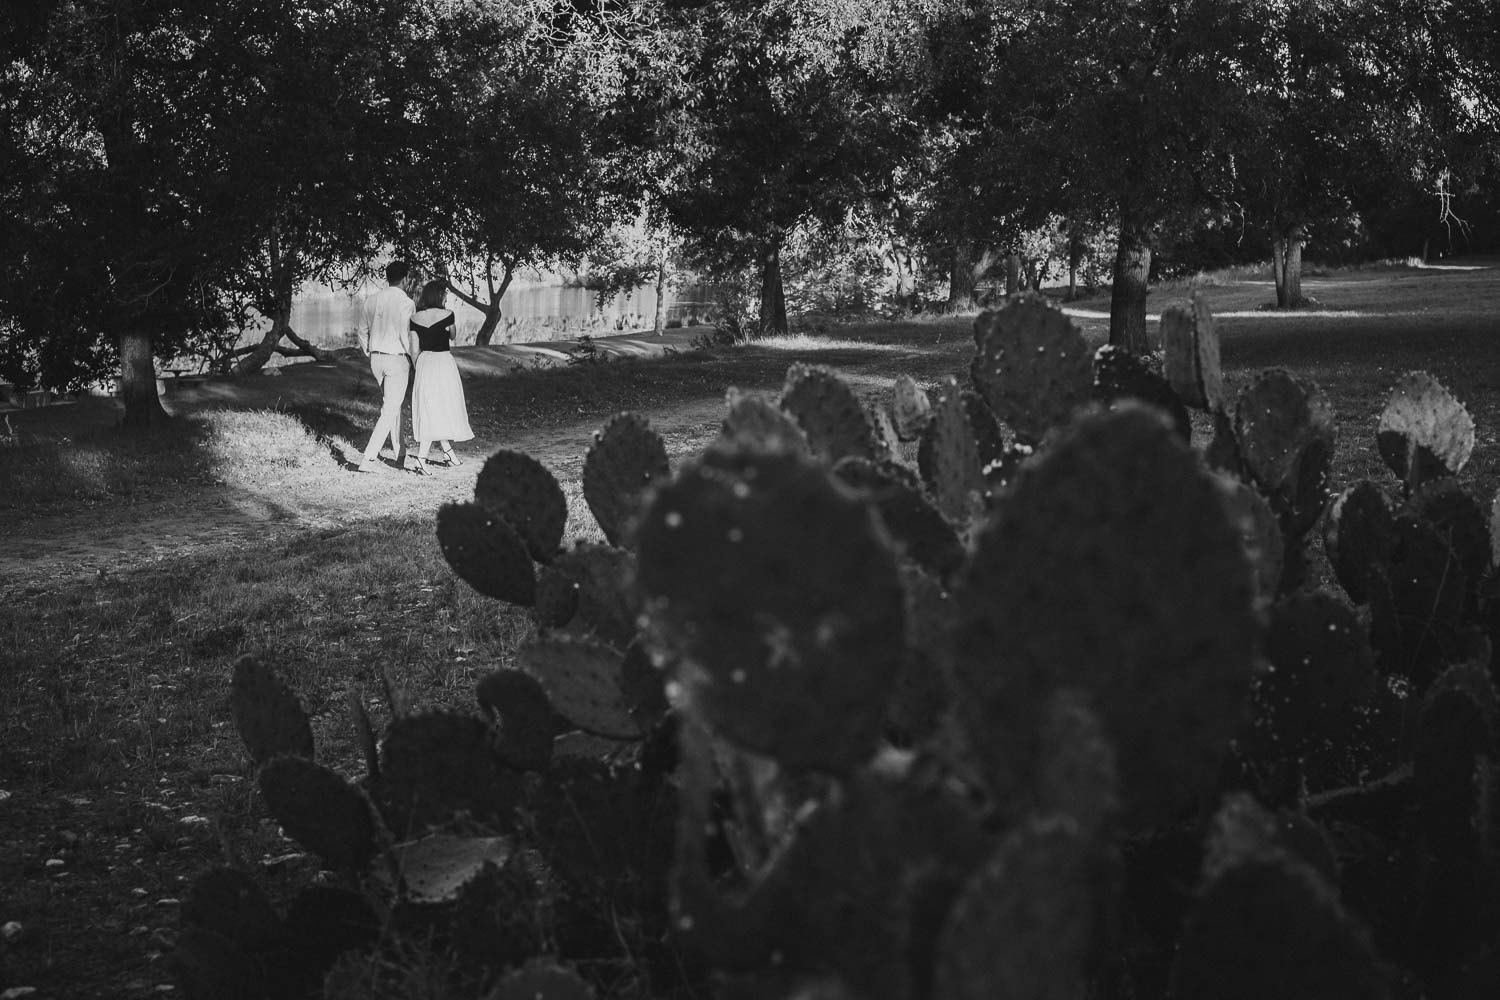 Jennifer and Eric's Hill Country engagement shoot in Hunt, Texas